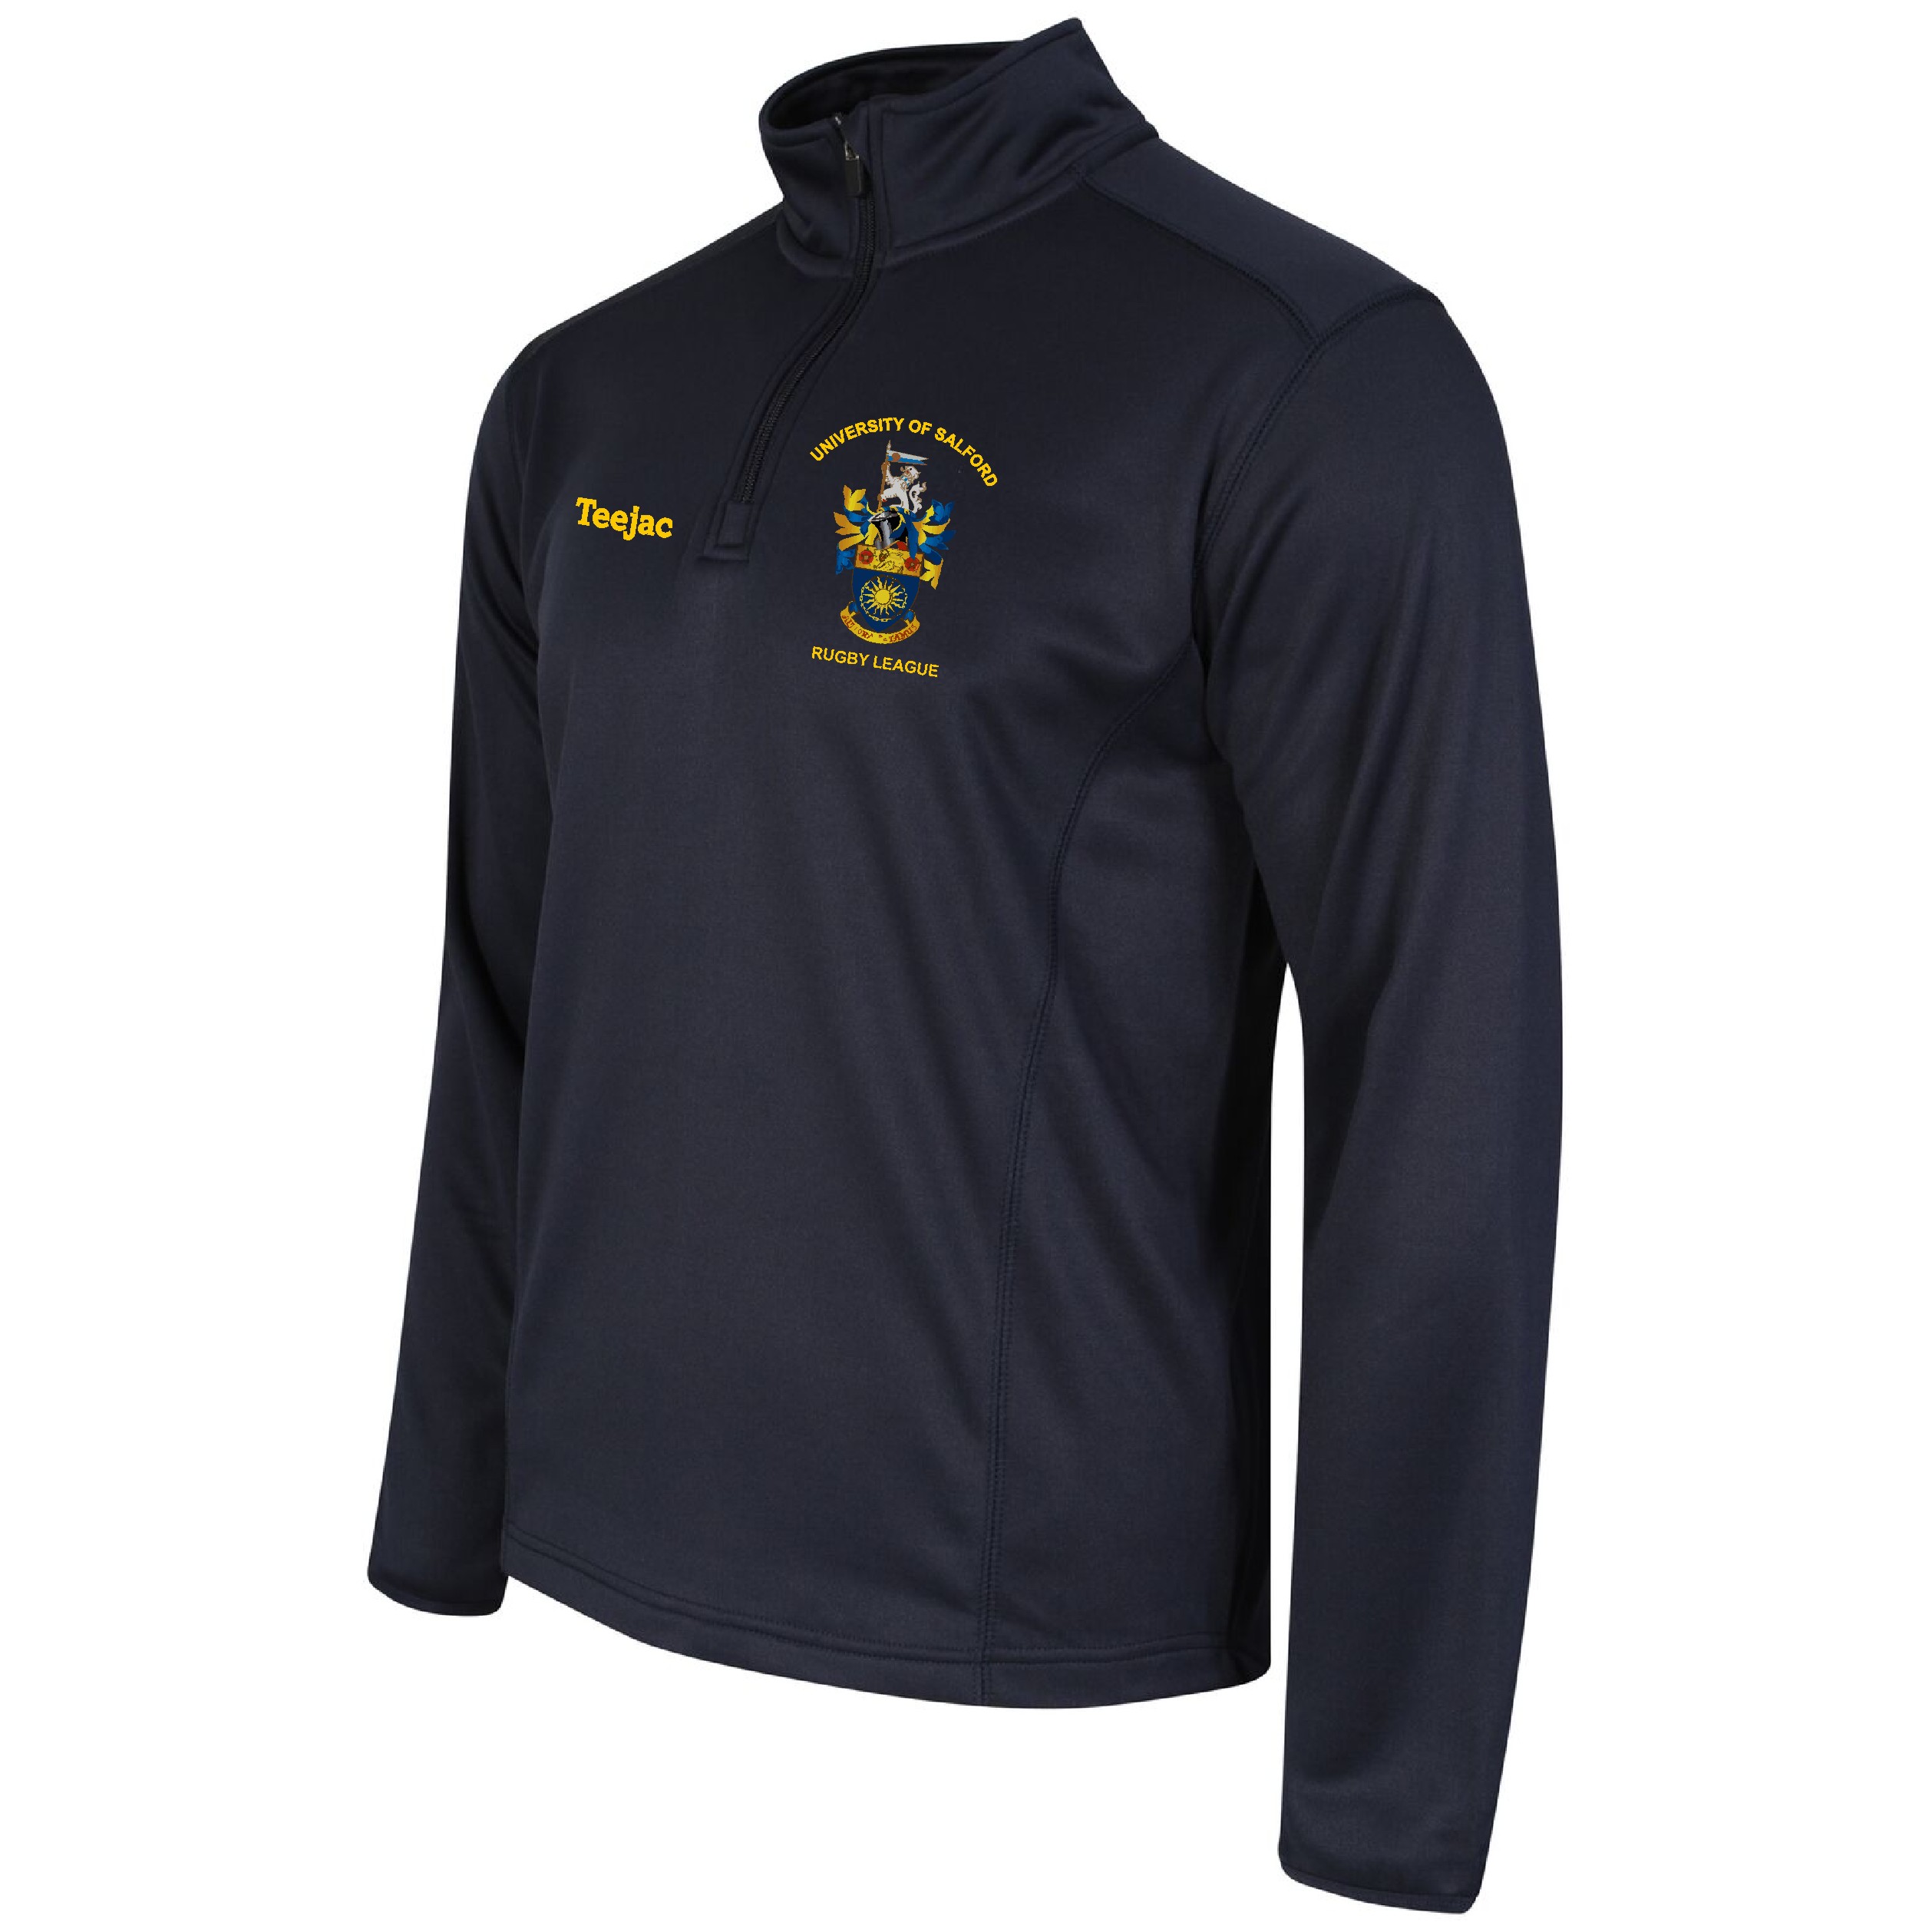 Salford University Rugby League Technical Top - Teejac